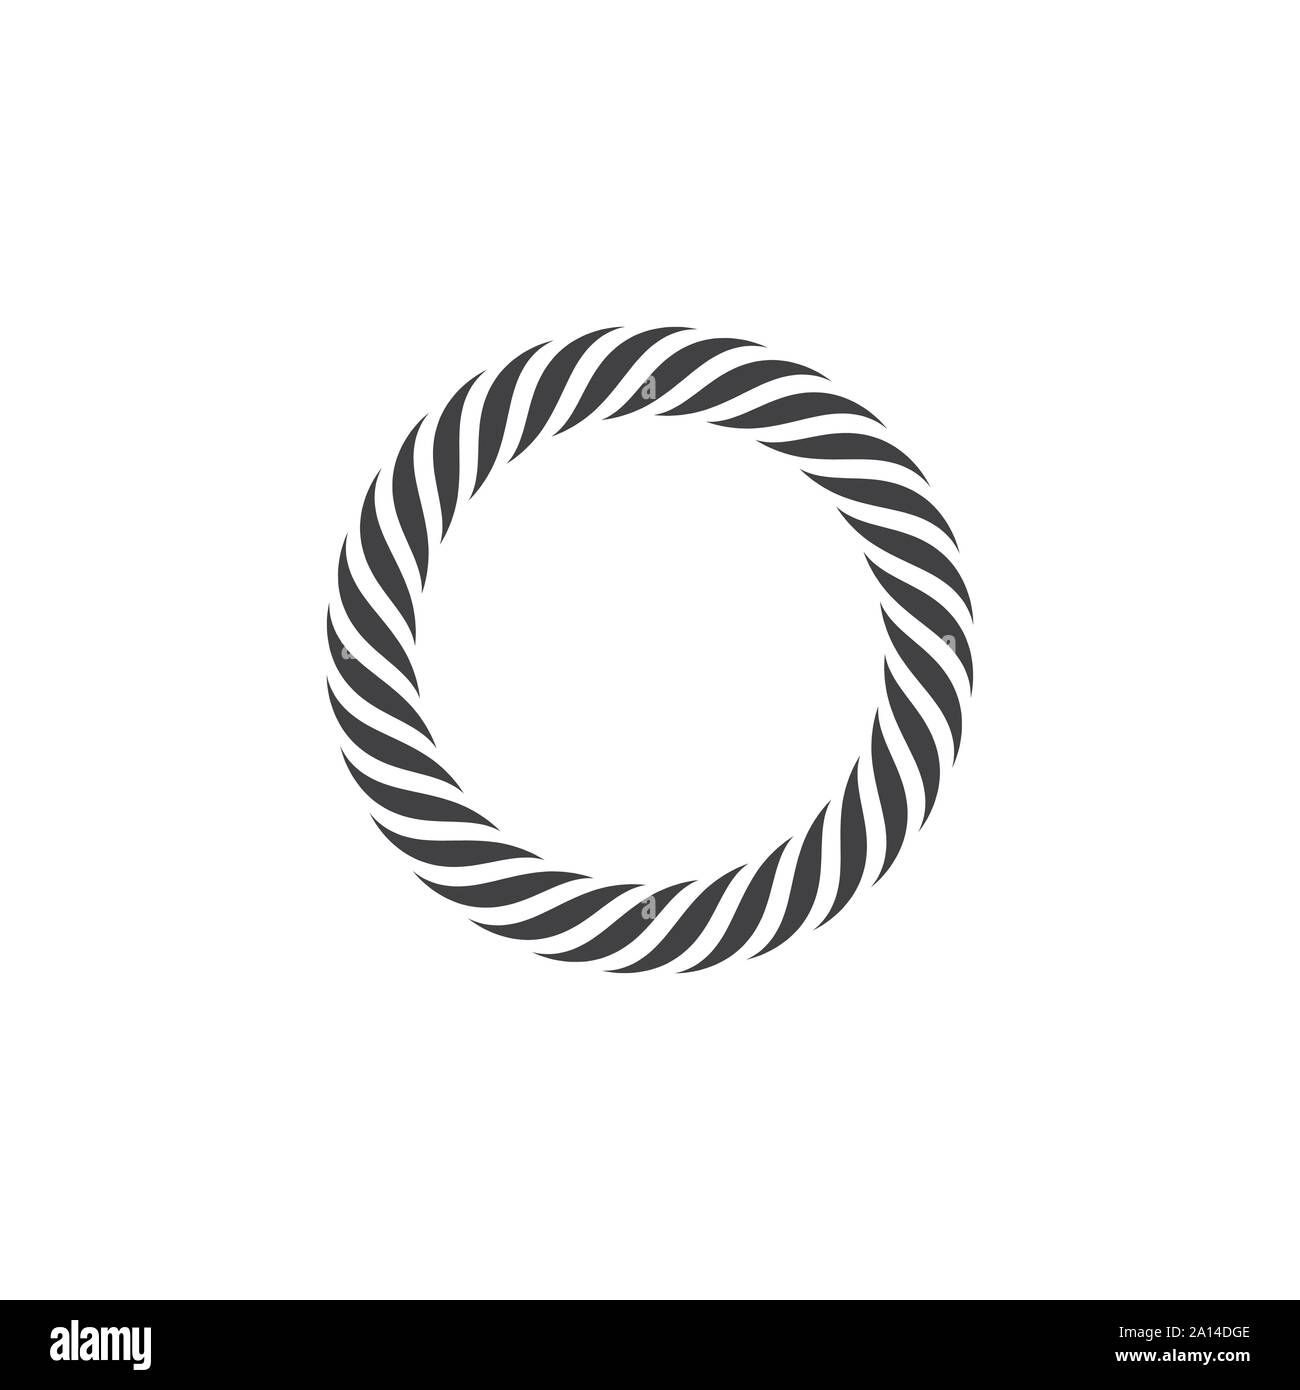 rope vector illustration design template Stock Vector